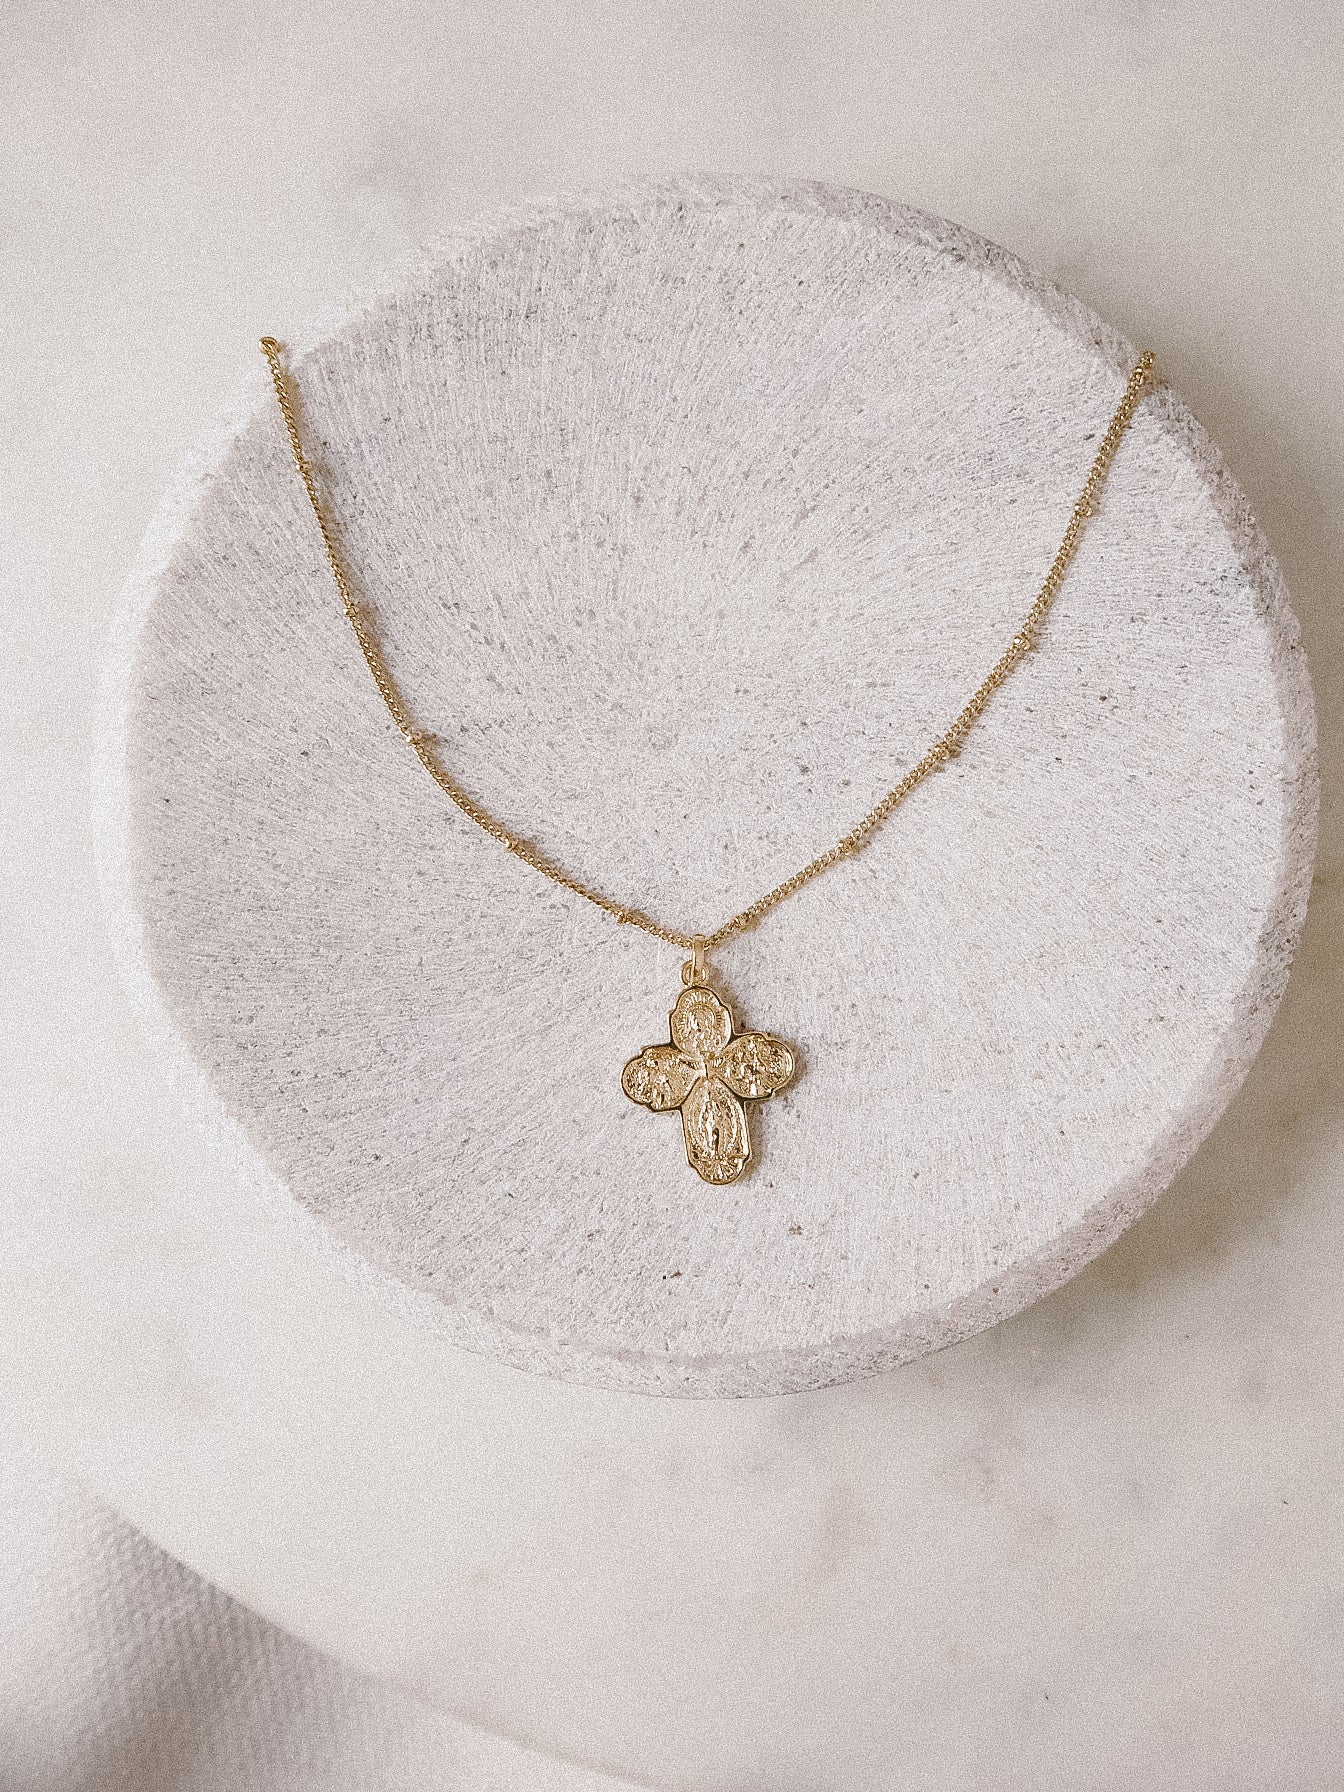 The Four Way Cross Gold Filled Satellite Chain Necklace